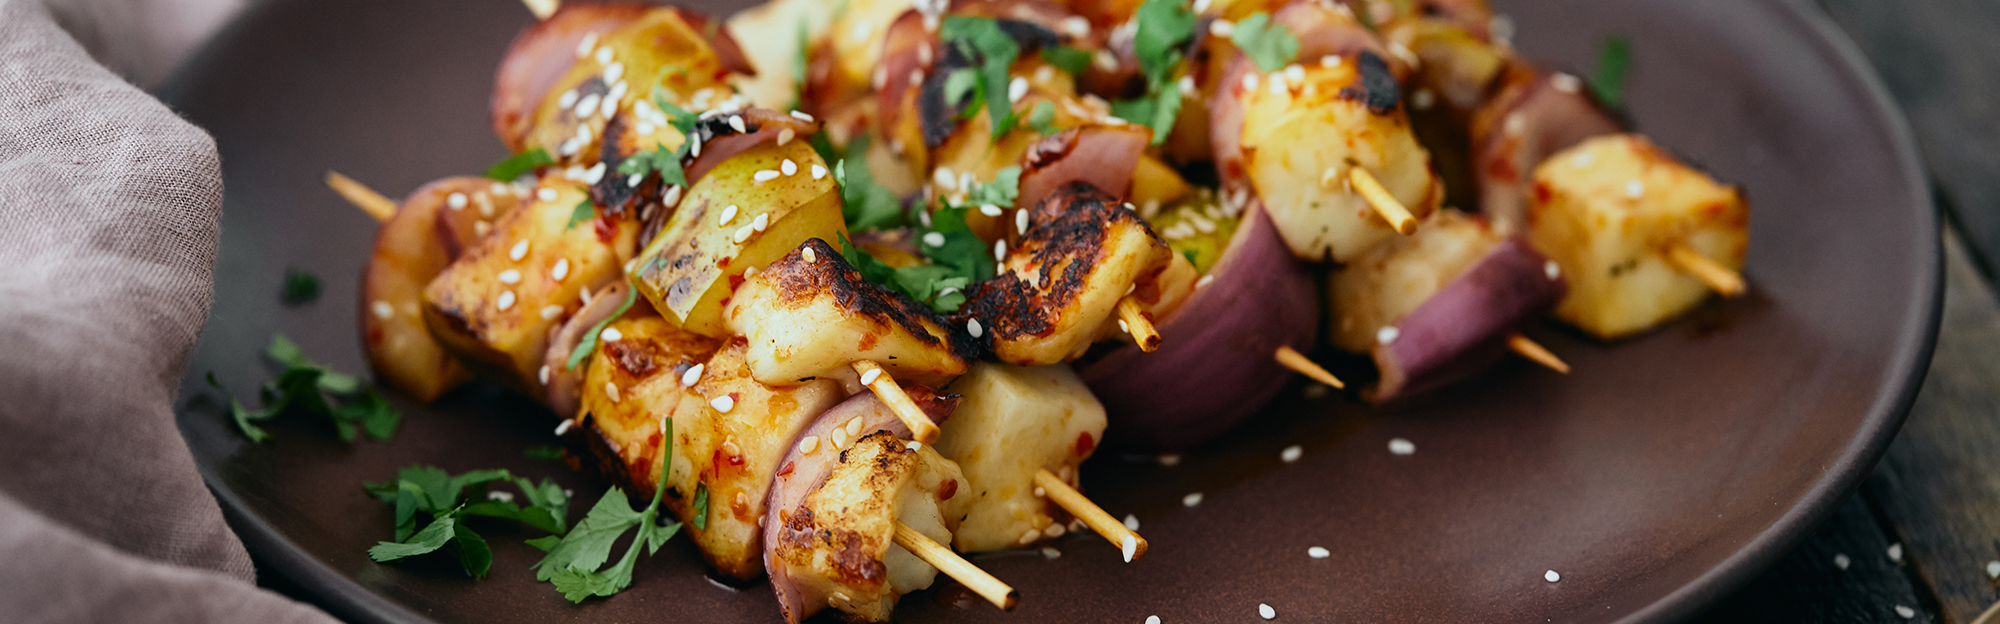 Pear Halloumi Skewers with Chili Sauce